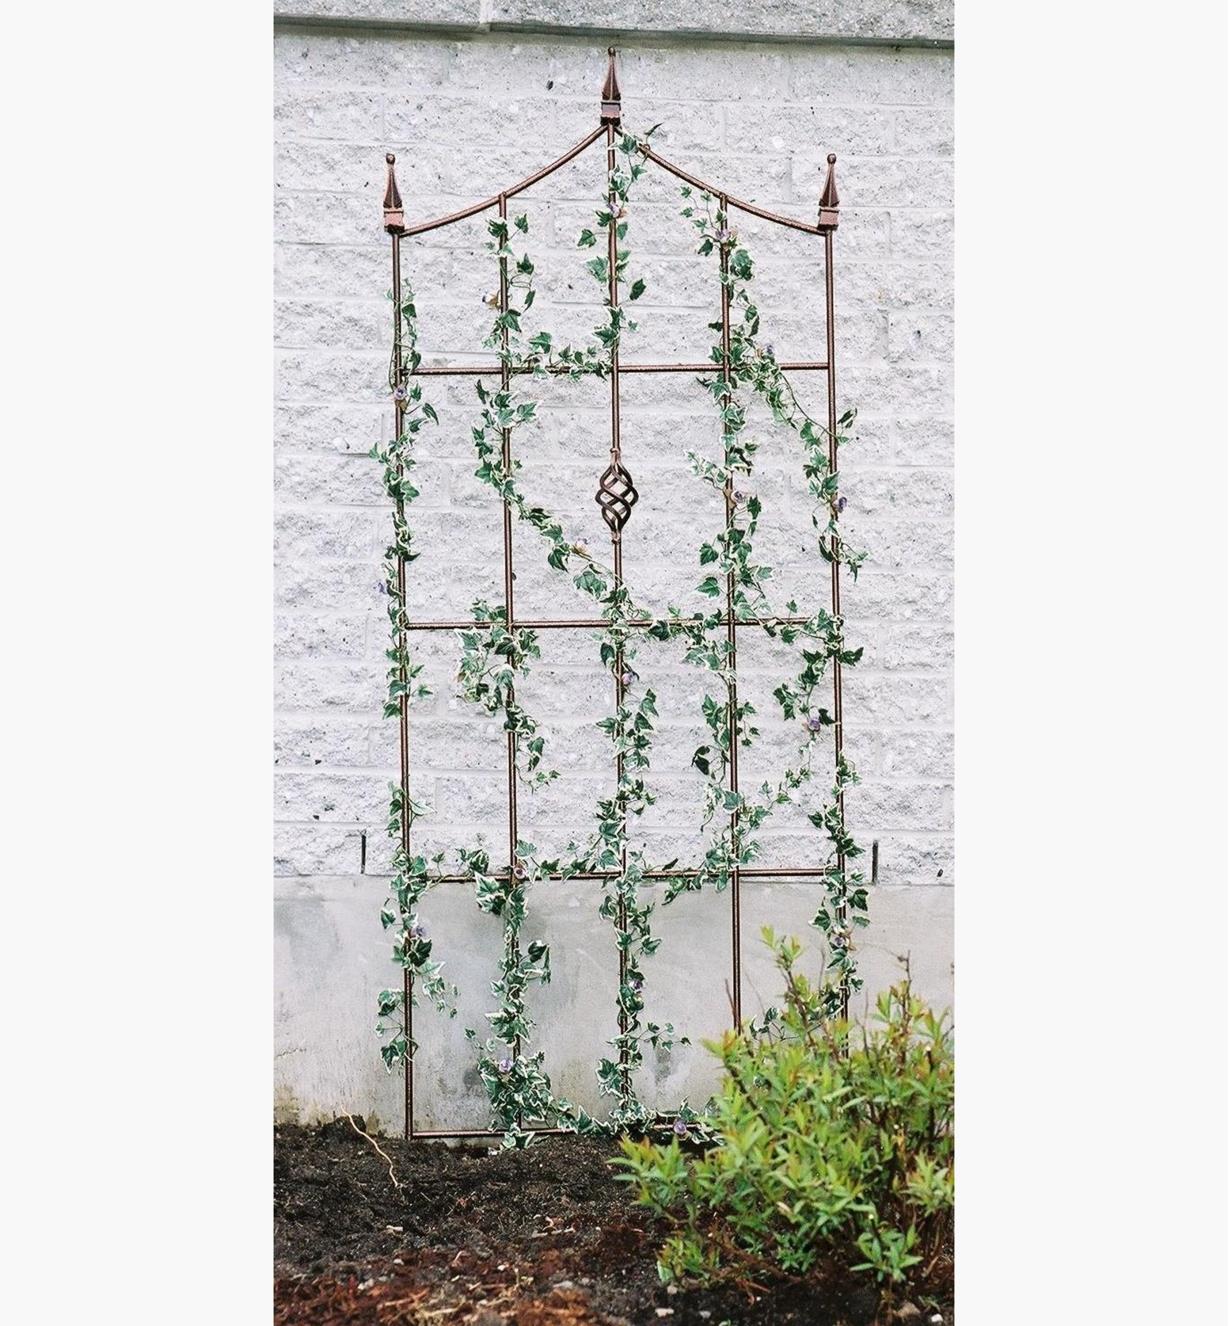 Ivy growing on the Camelot garden trellis